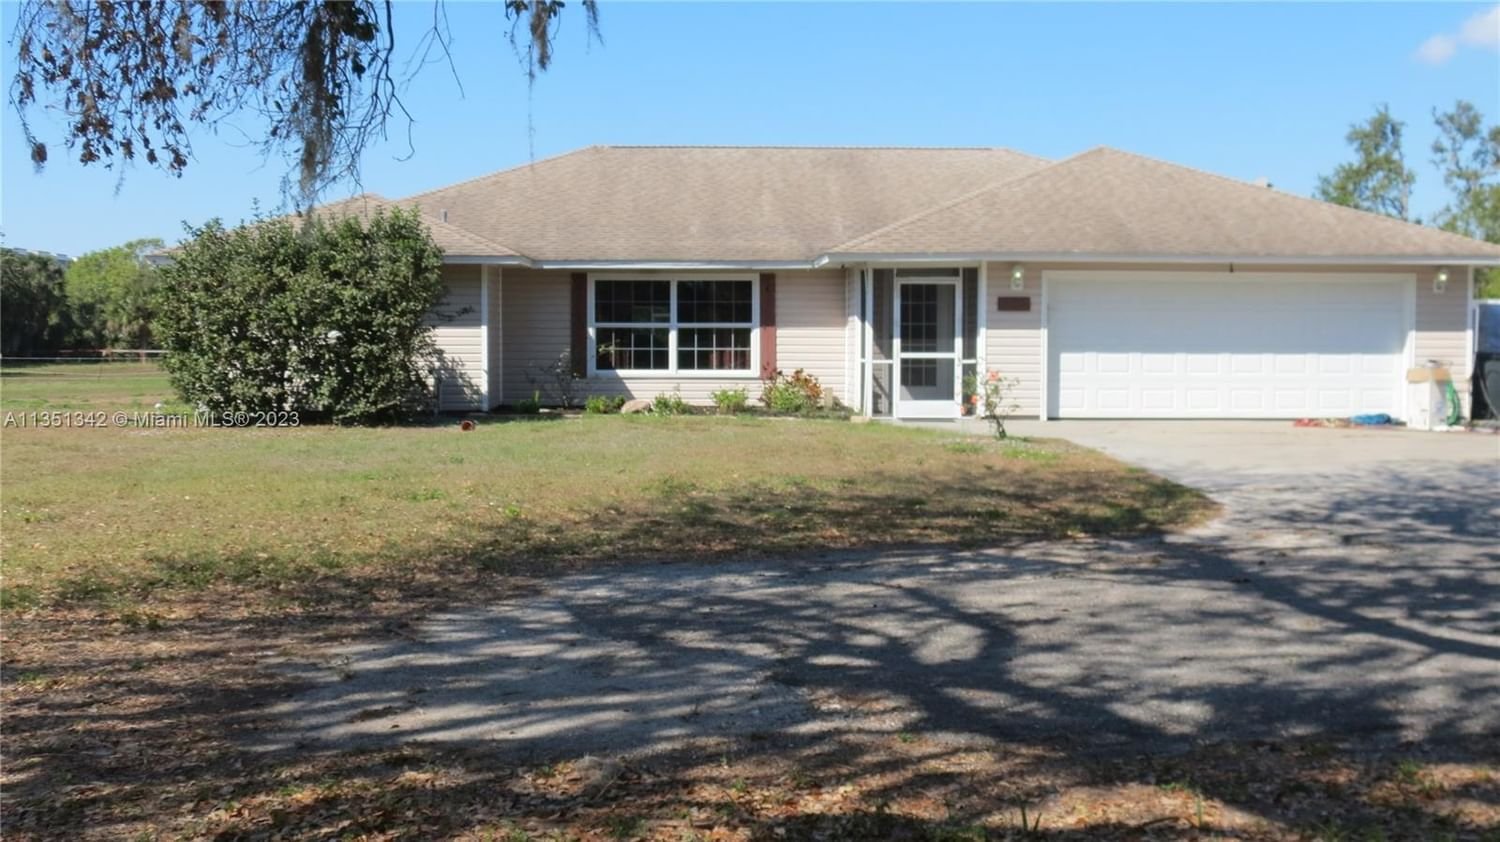 Real estate property located at 291 Greencove Road, Sarasota County, Venice, FL